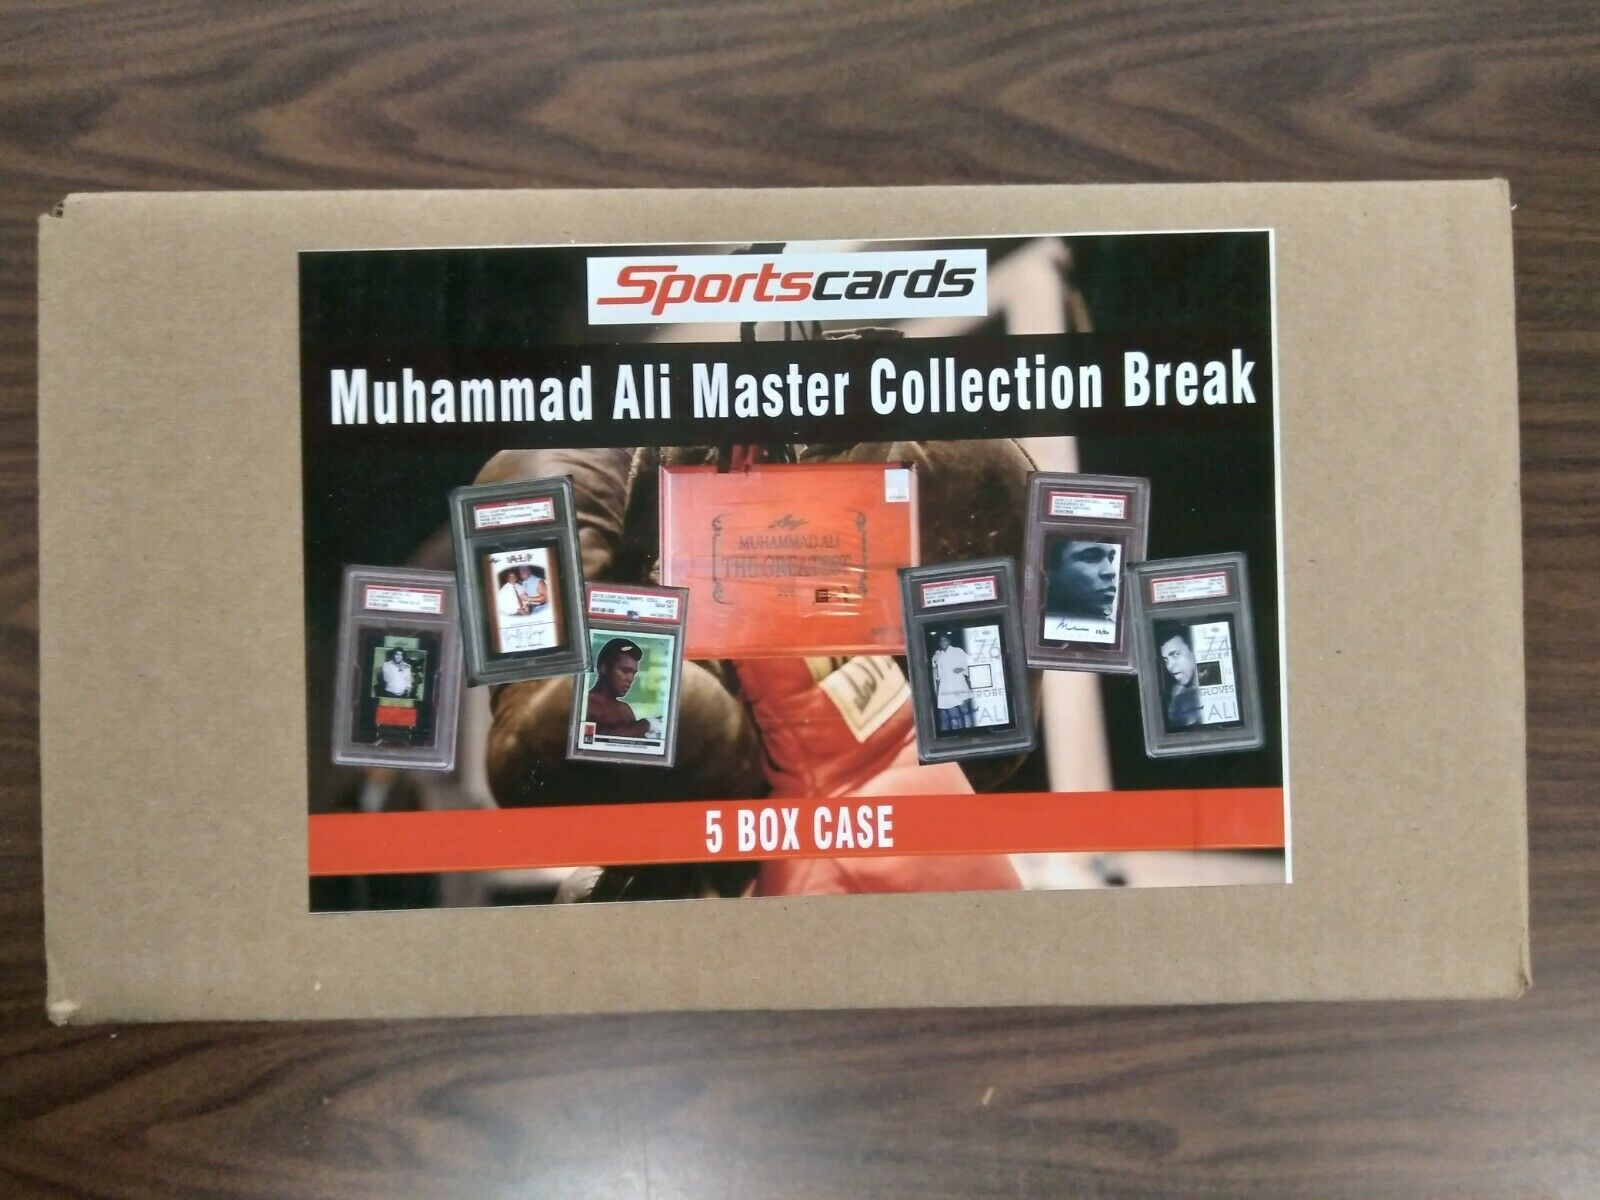 MUHAMMAD ALI MASTER COLLECTION BREAK CASE OF 5 BOXES